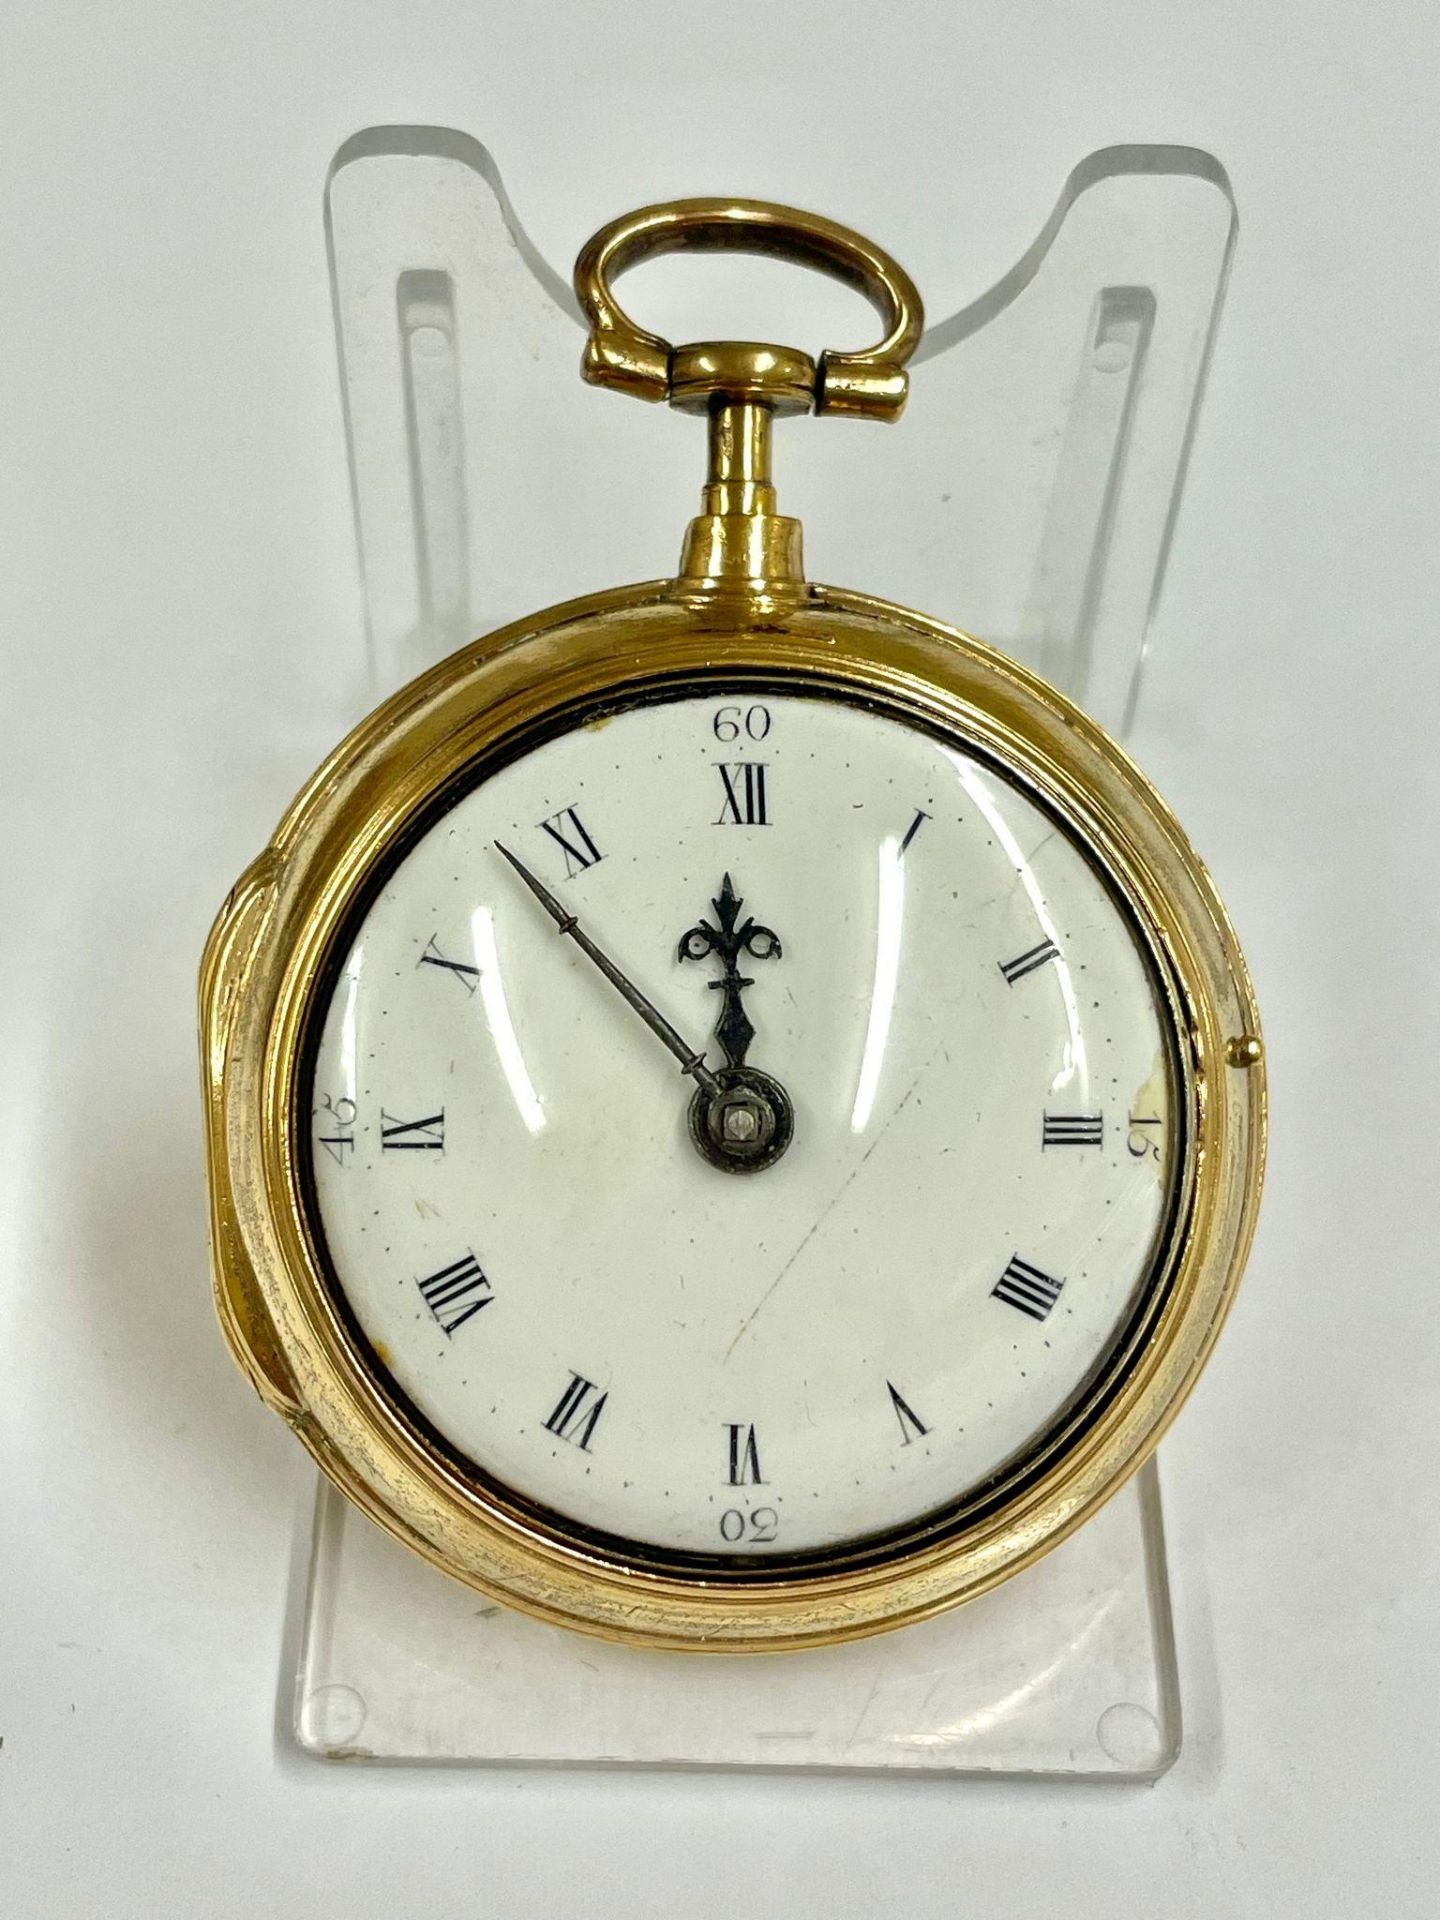 Antique c1700s pair case verge fusee pocket watch , ticking but sold with no guarantees.